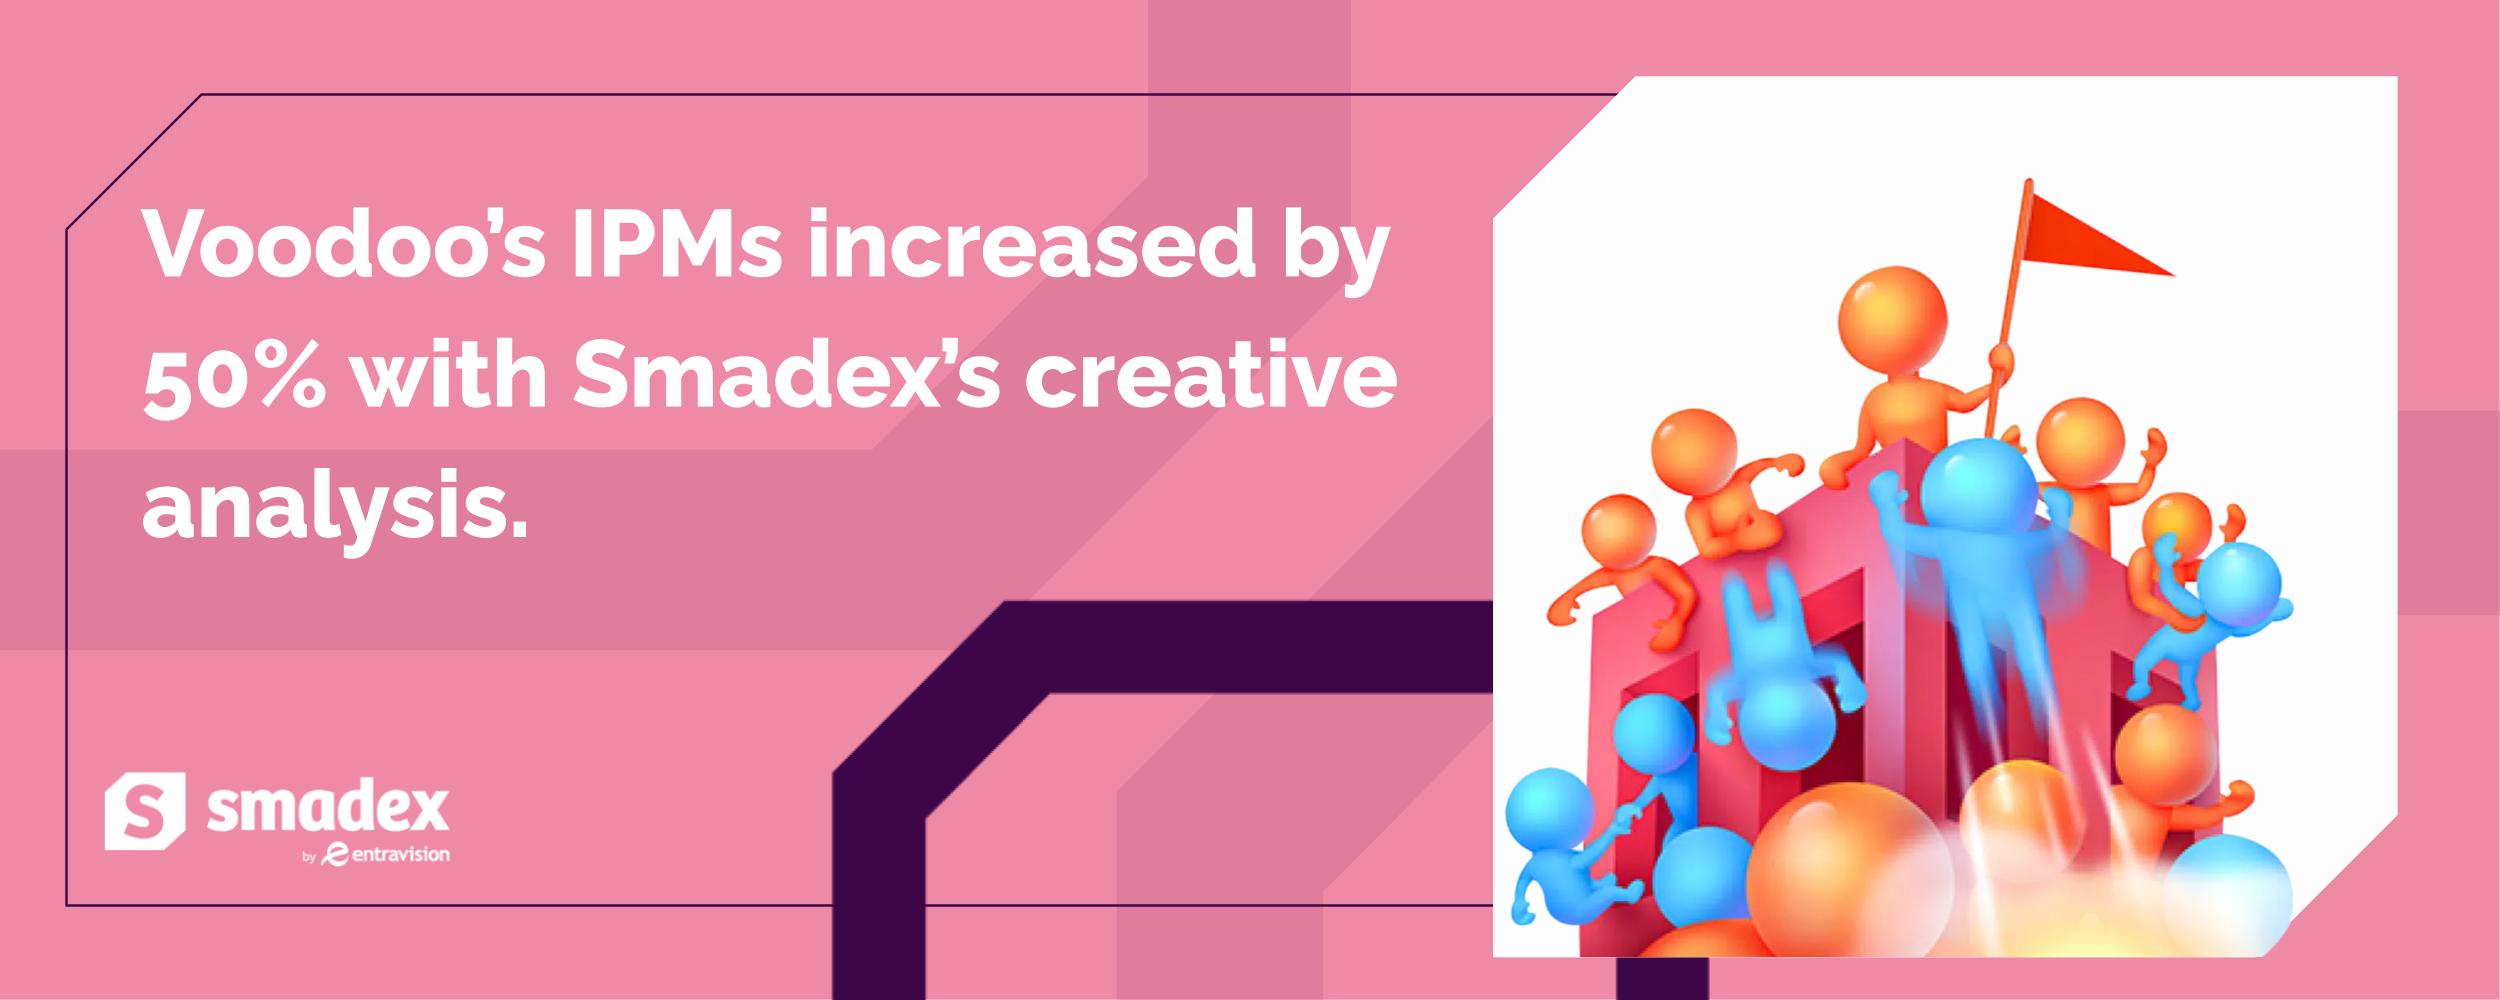 Voodoo’s IPMs increased by 50% with Smadex’s creative analysis.